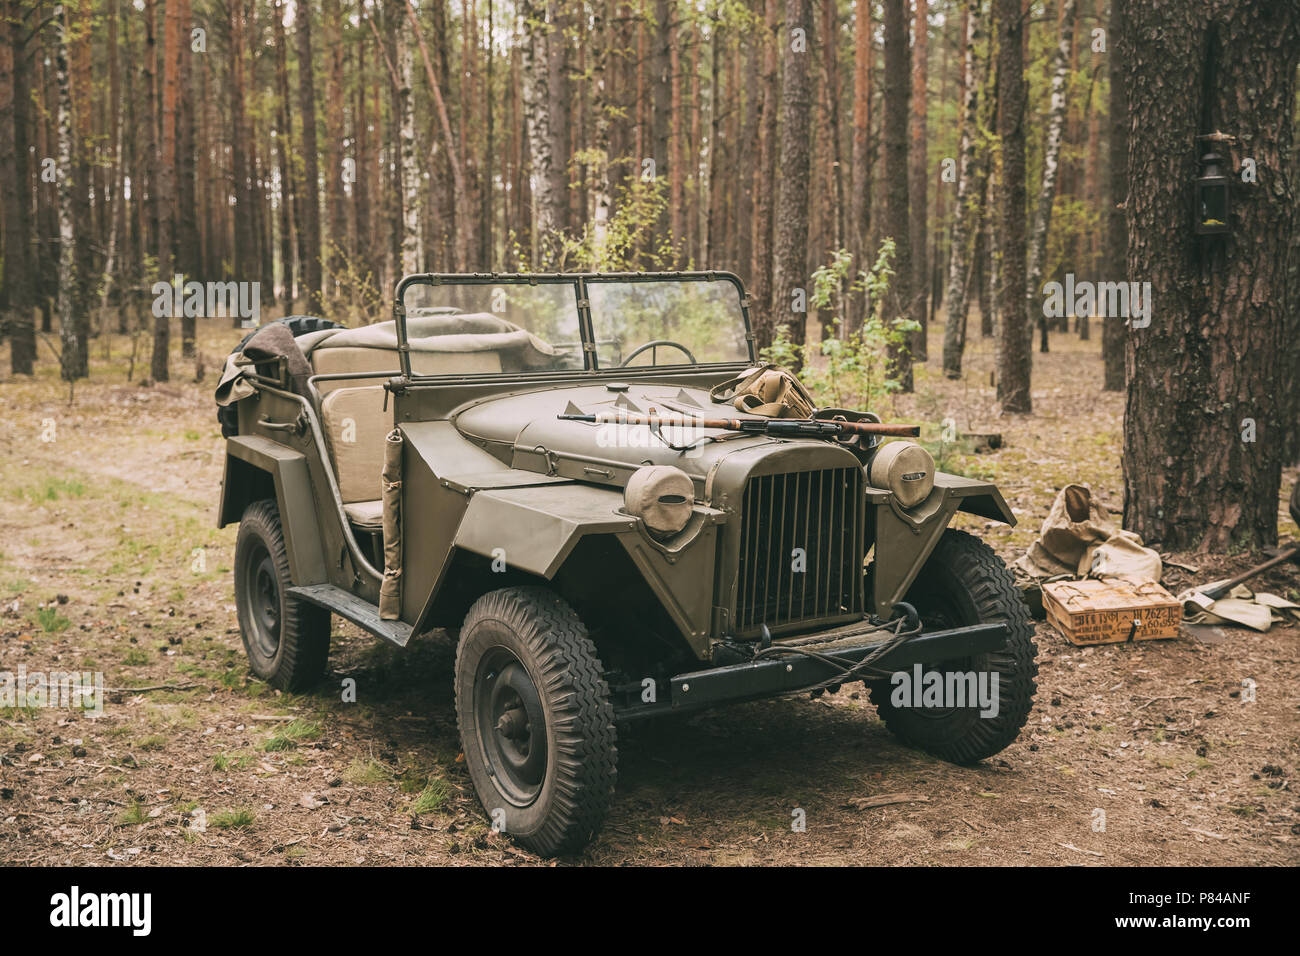 Russian Soviet World War II Four-wheel Drive Army Truck Gaz-67 Car In Forest. WWII Equipment Of Red Army. Stock Photo